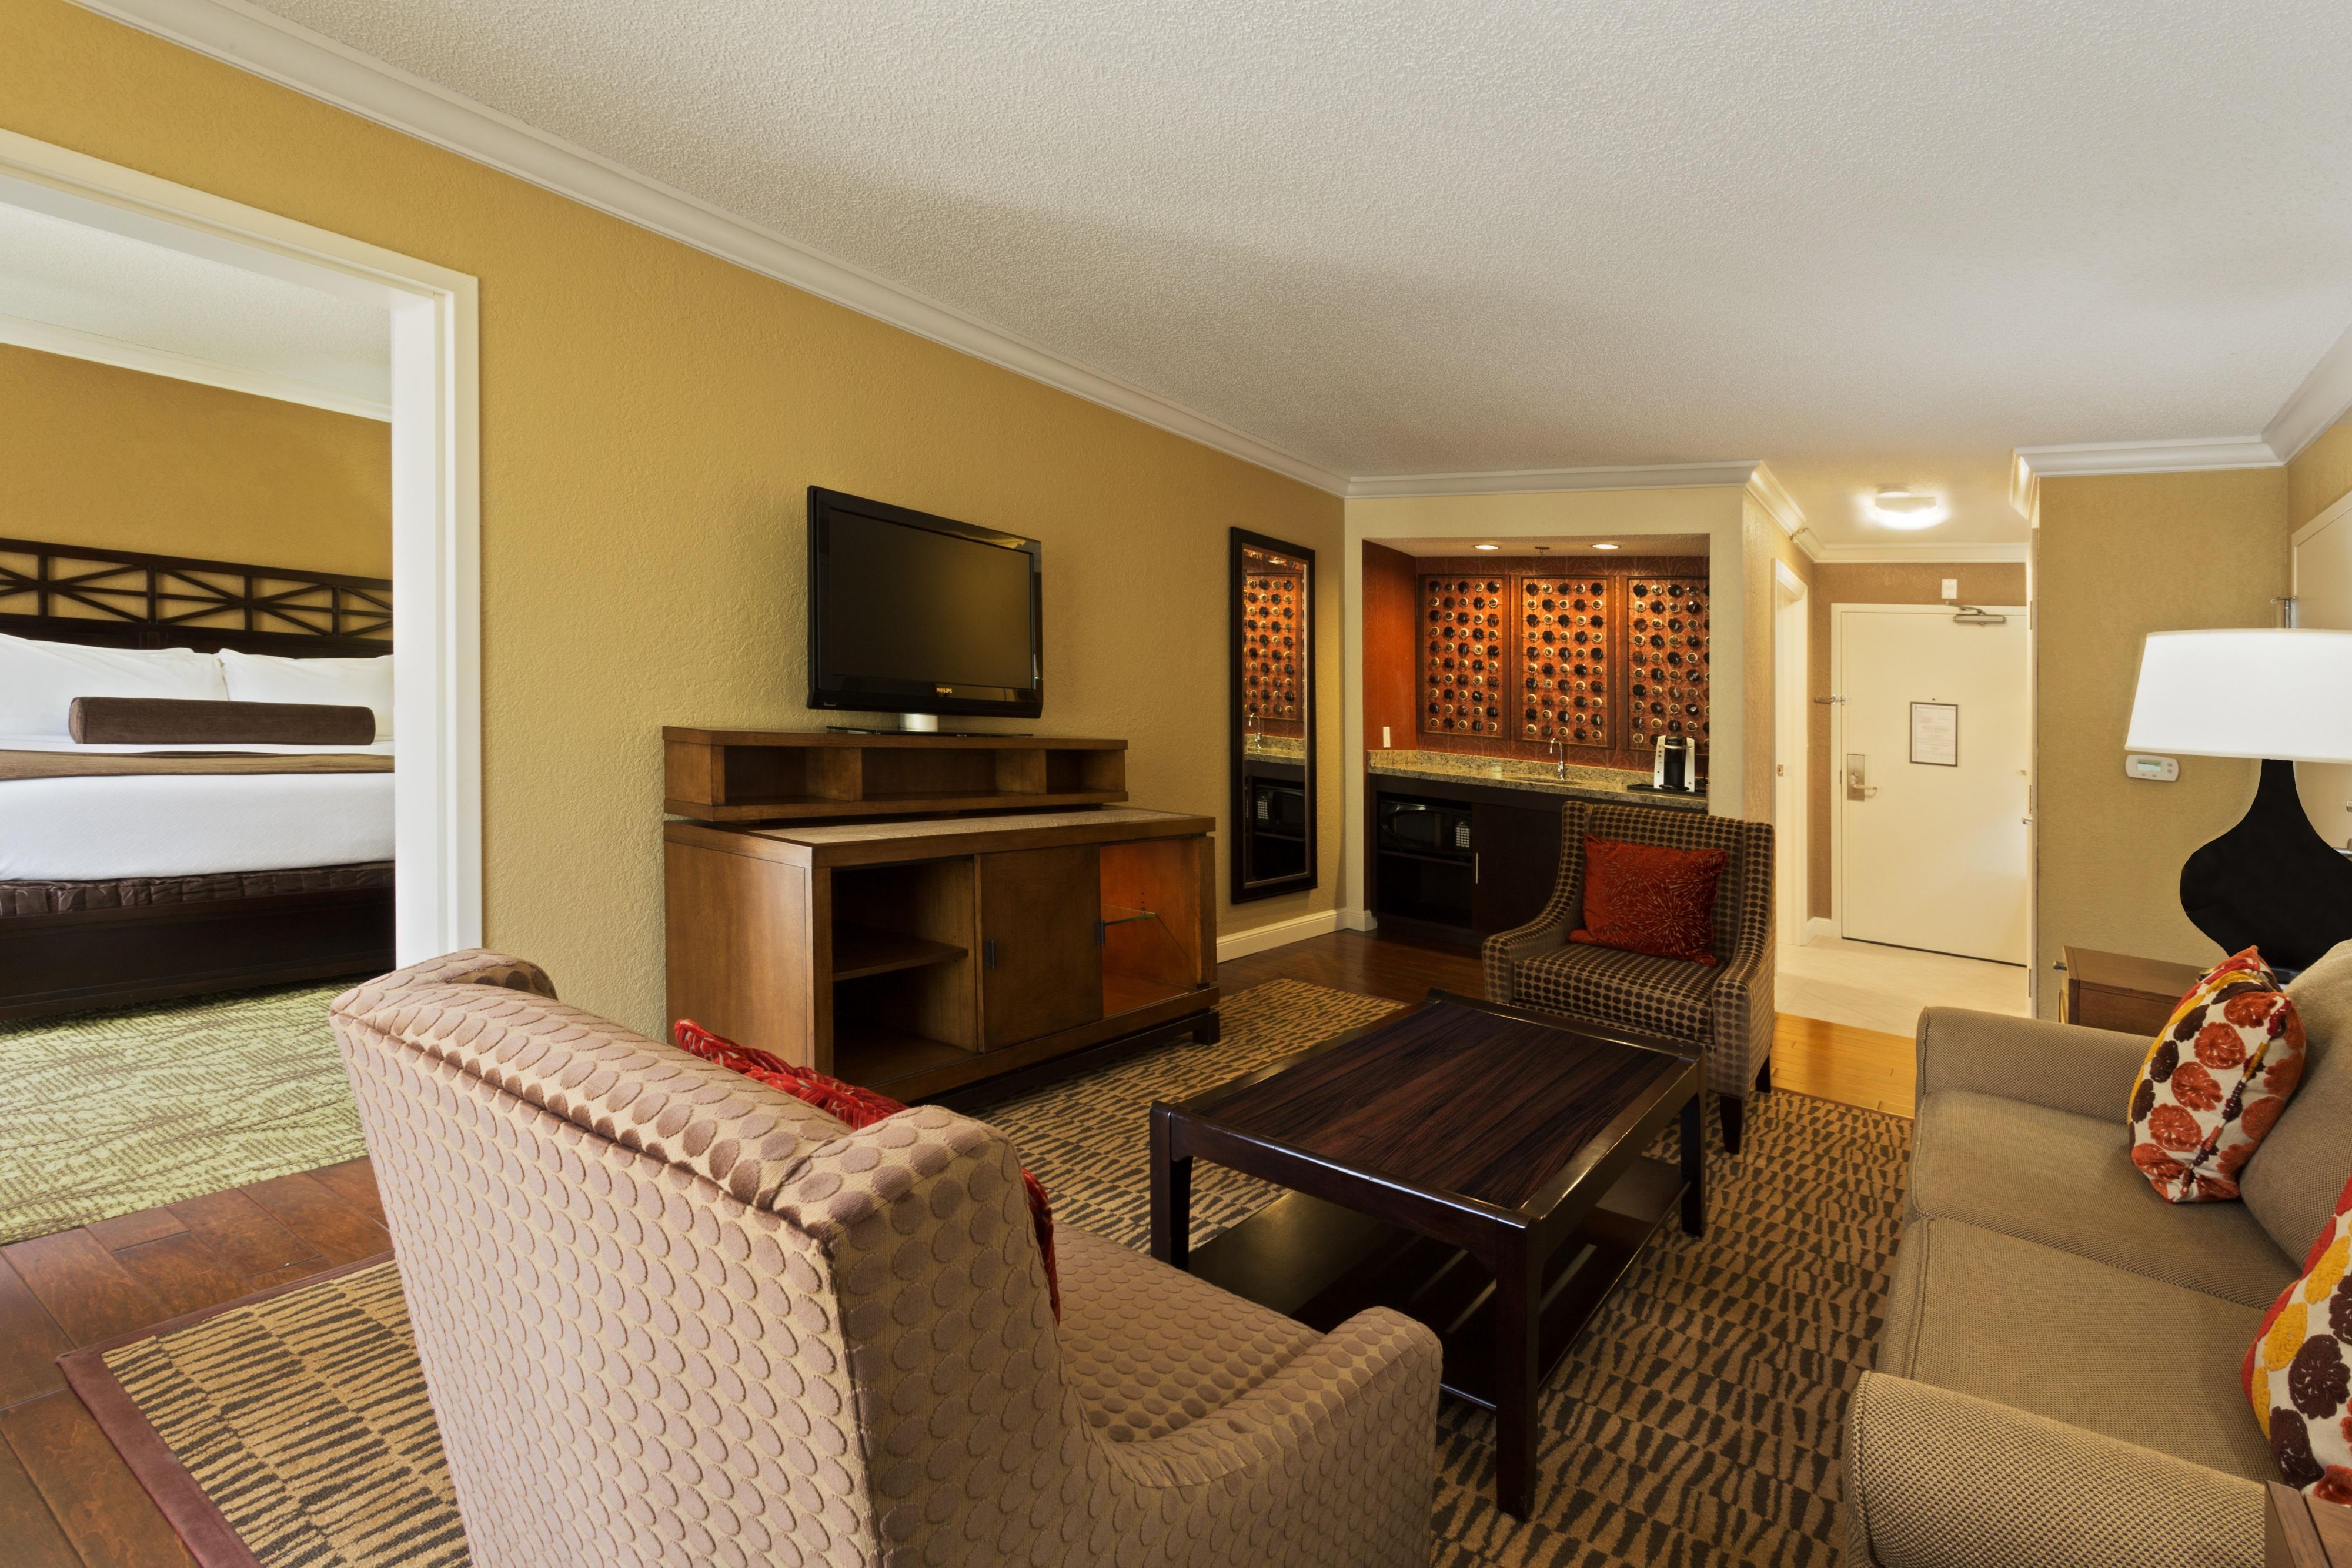 Enjoy your stay in our relaxing and spacious King Suite room.